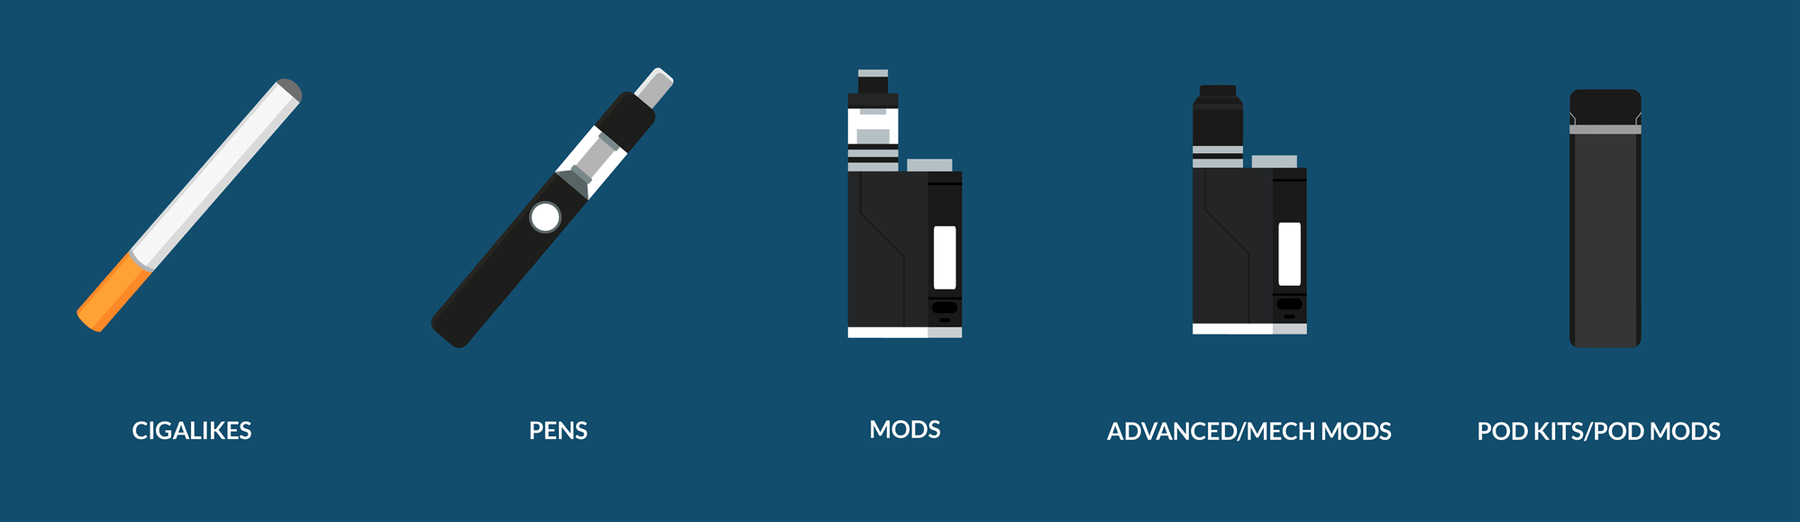 The Different Types of Vaping Devices: Sub-Ohm, Pod, Open Tank, and Disposables - Vape Direct